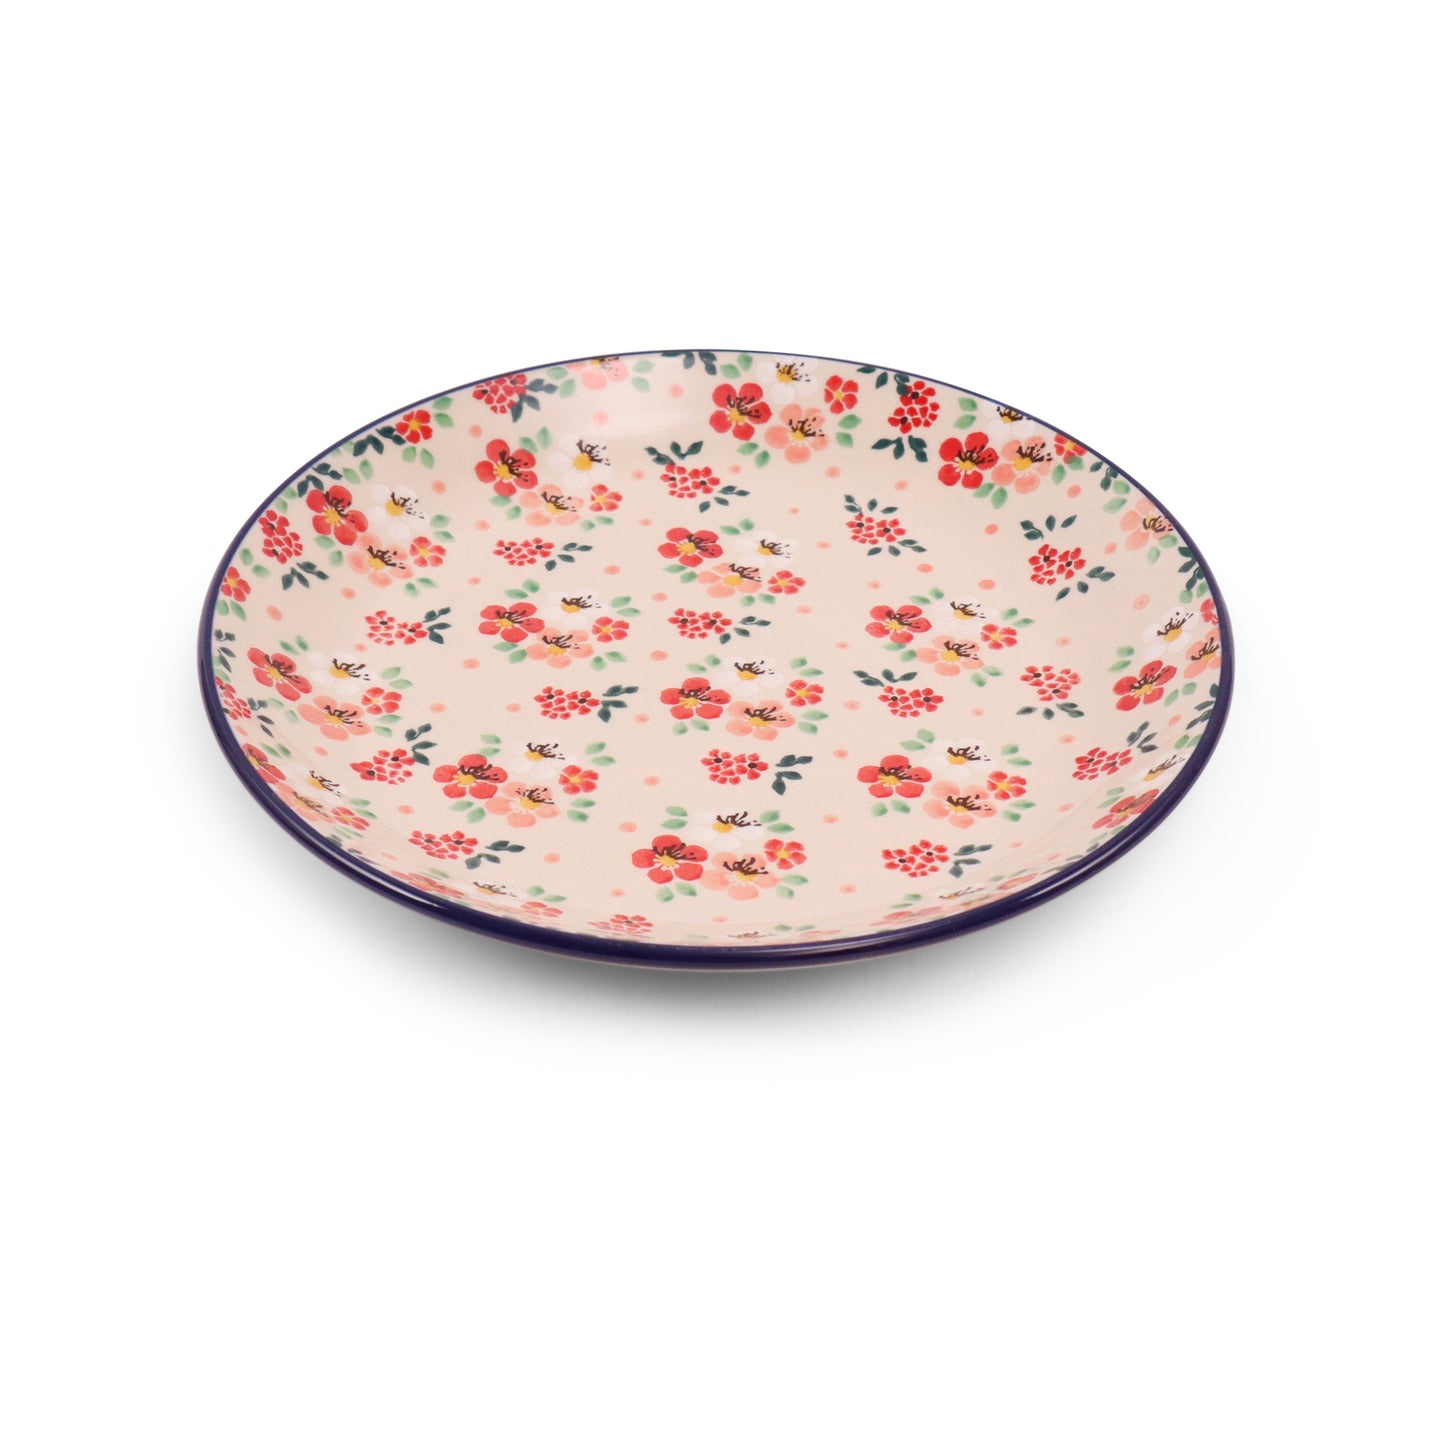 10.5" Dinner Plate. Pattern: Picture Perfect